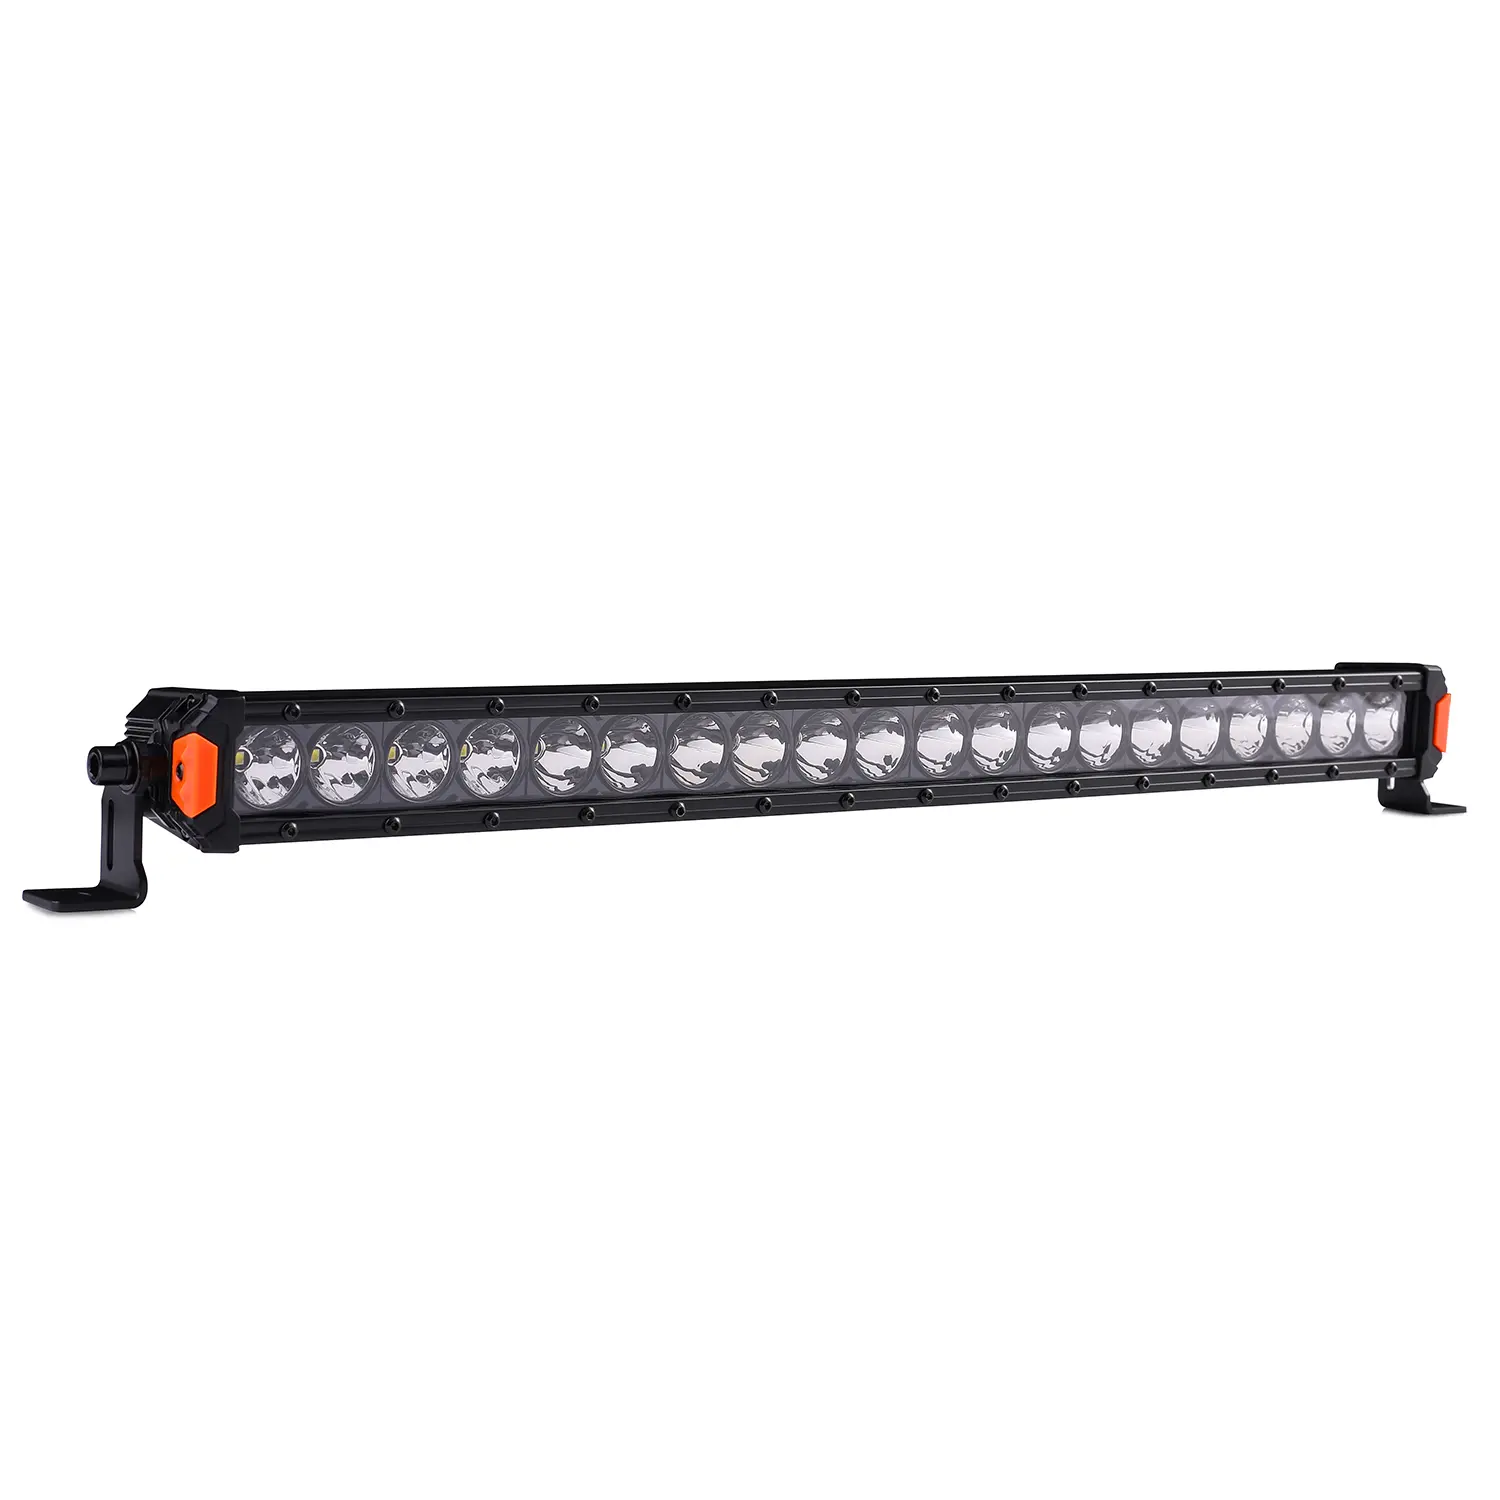 Iets Fictief Drink water Newest Design Auto Lighting Systems 52 Inch 250w Atv Car Led Light Bars Off  Road Lights For 4x4 Truck Suv - Buy Led Light Bars,Led Bar,Barra De Luz Led  Product on Alibaba.com